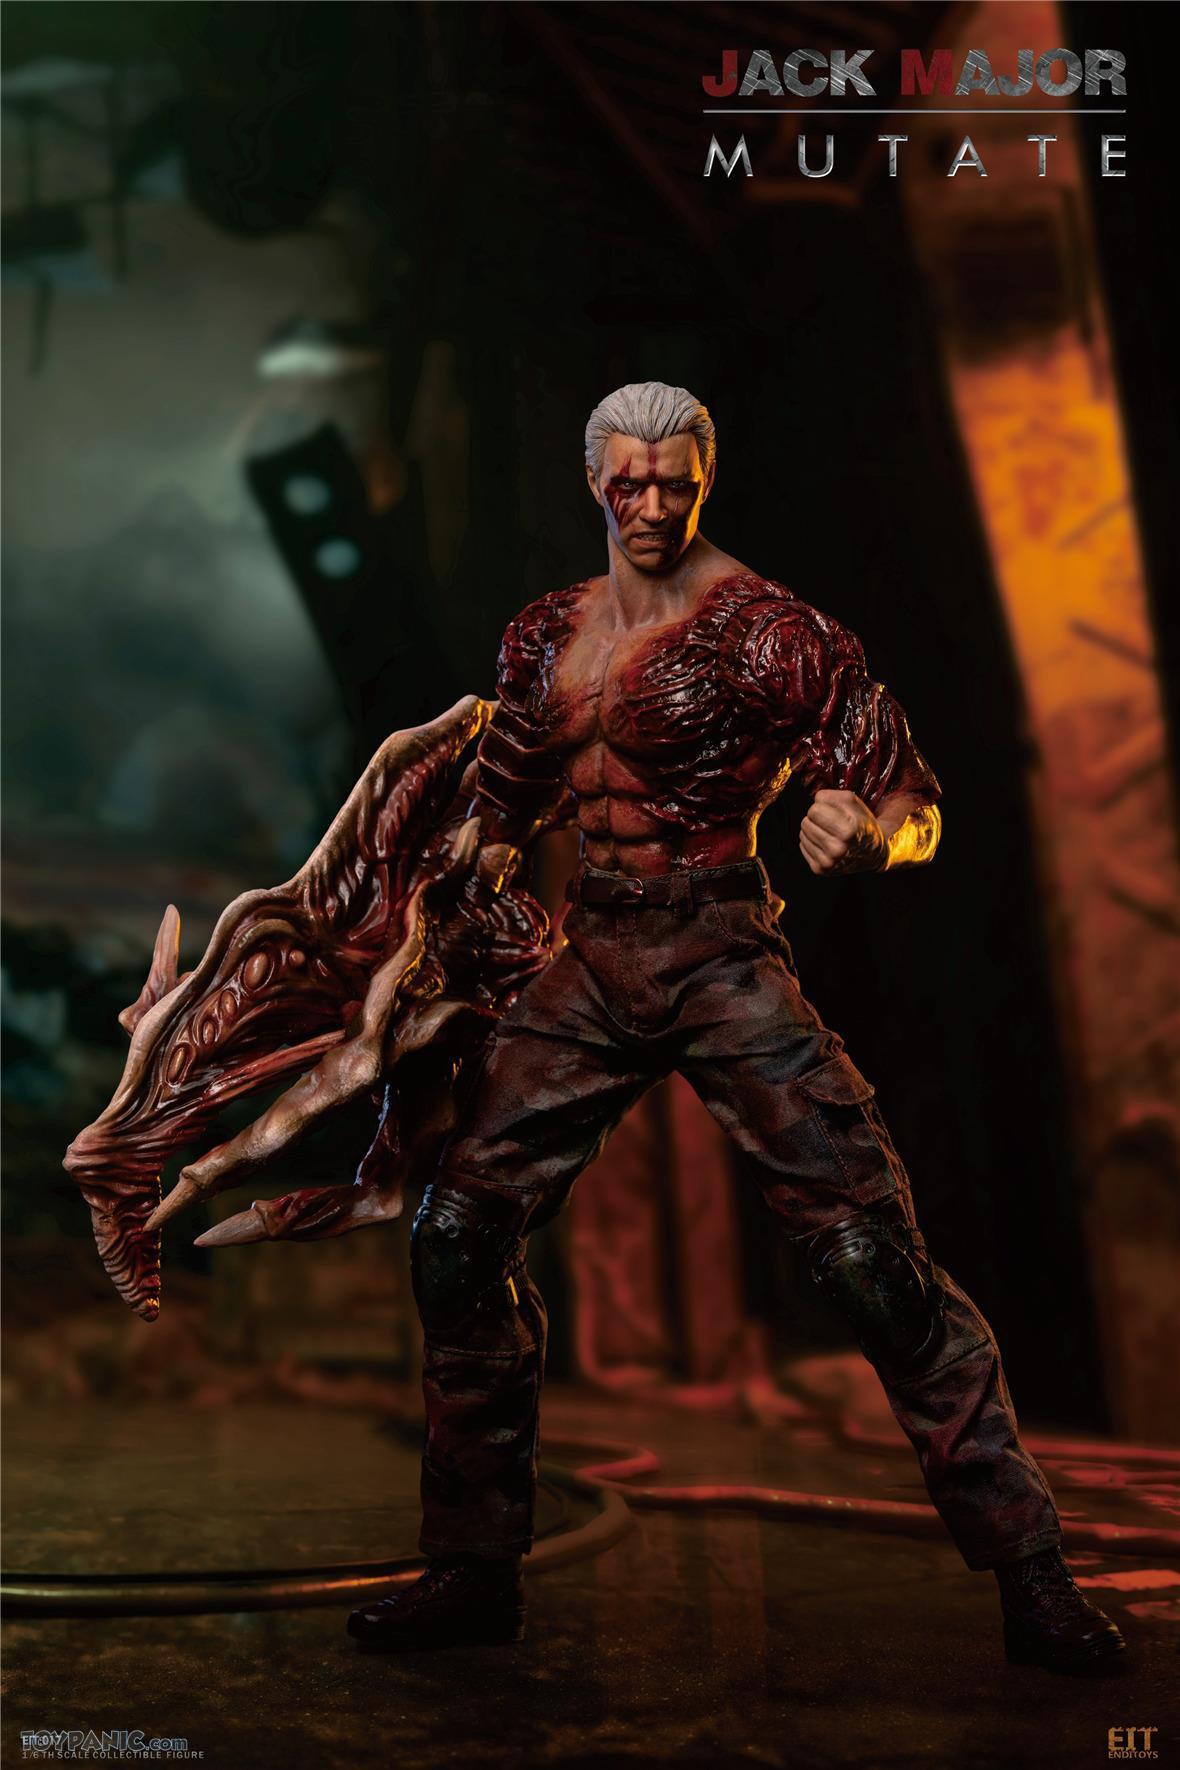 NEW PRODUCT:  1/6 Jack Major Mutate from End I Toys  2732024105950AM_6739850